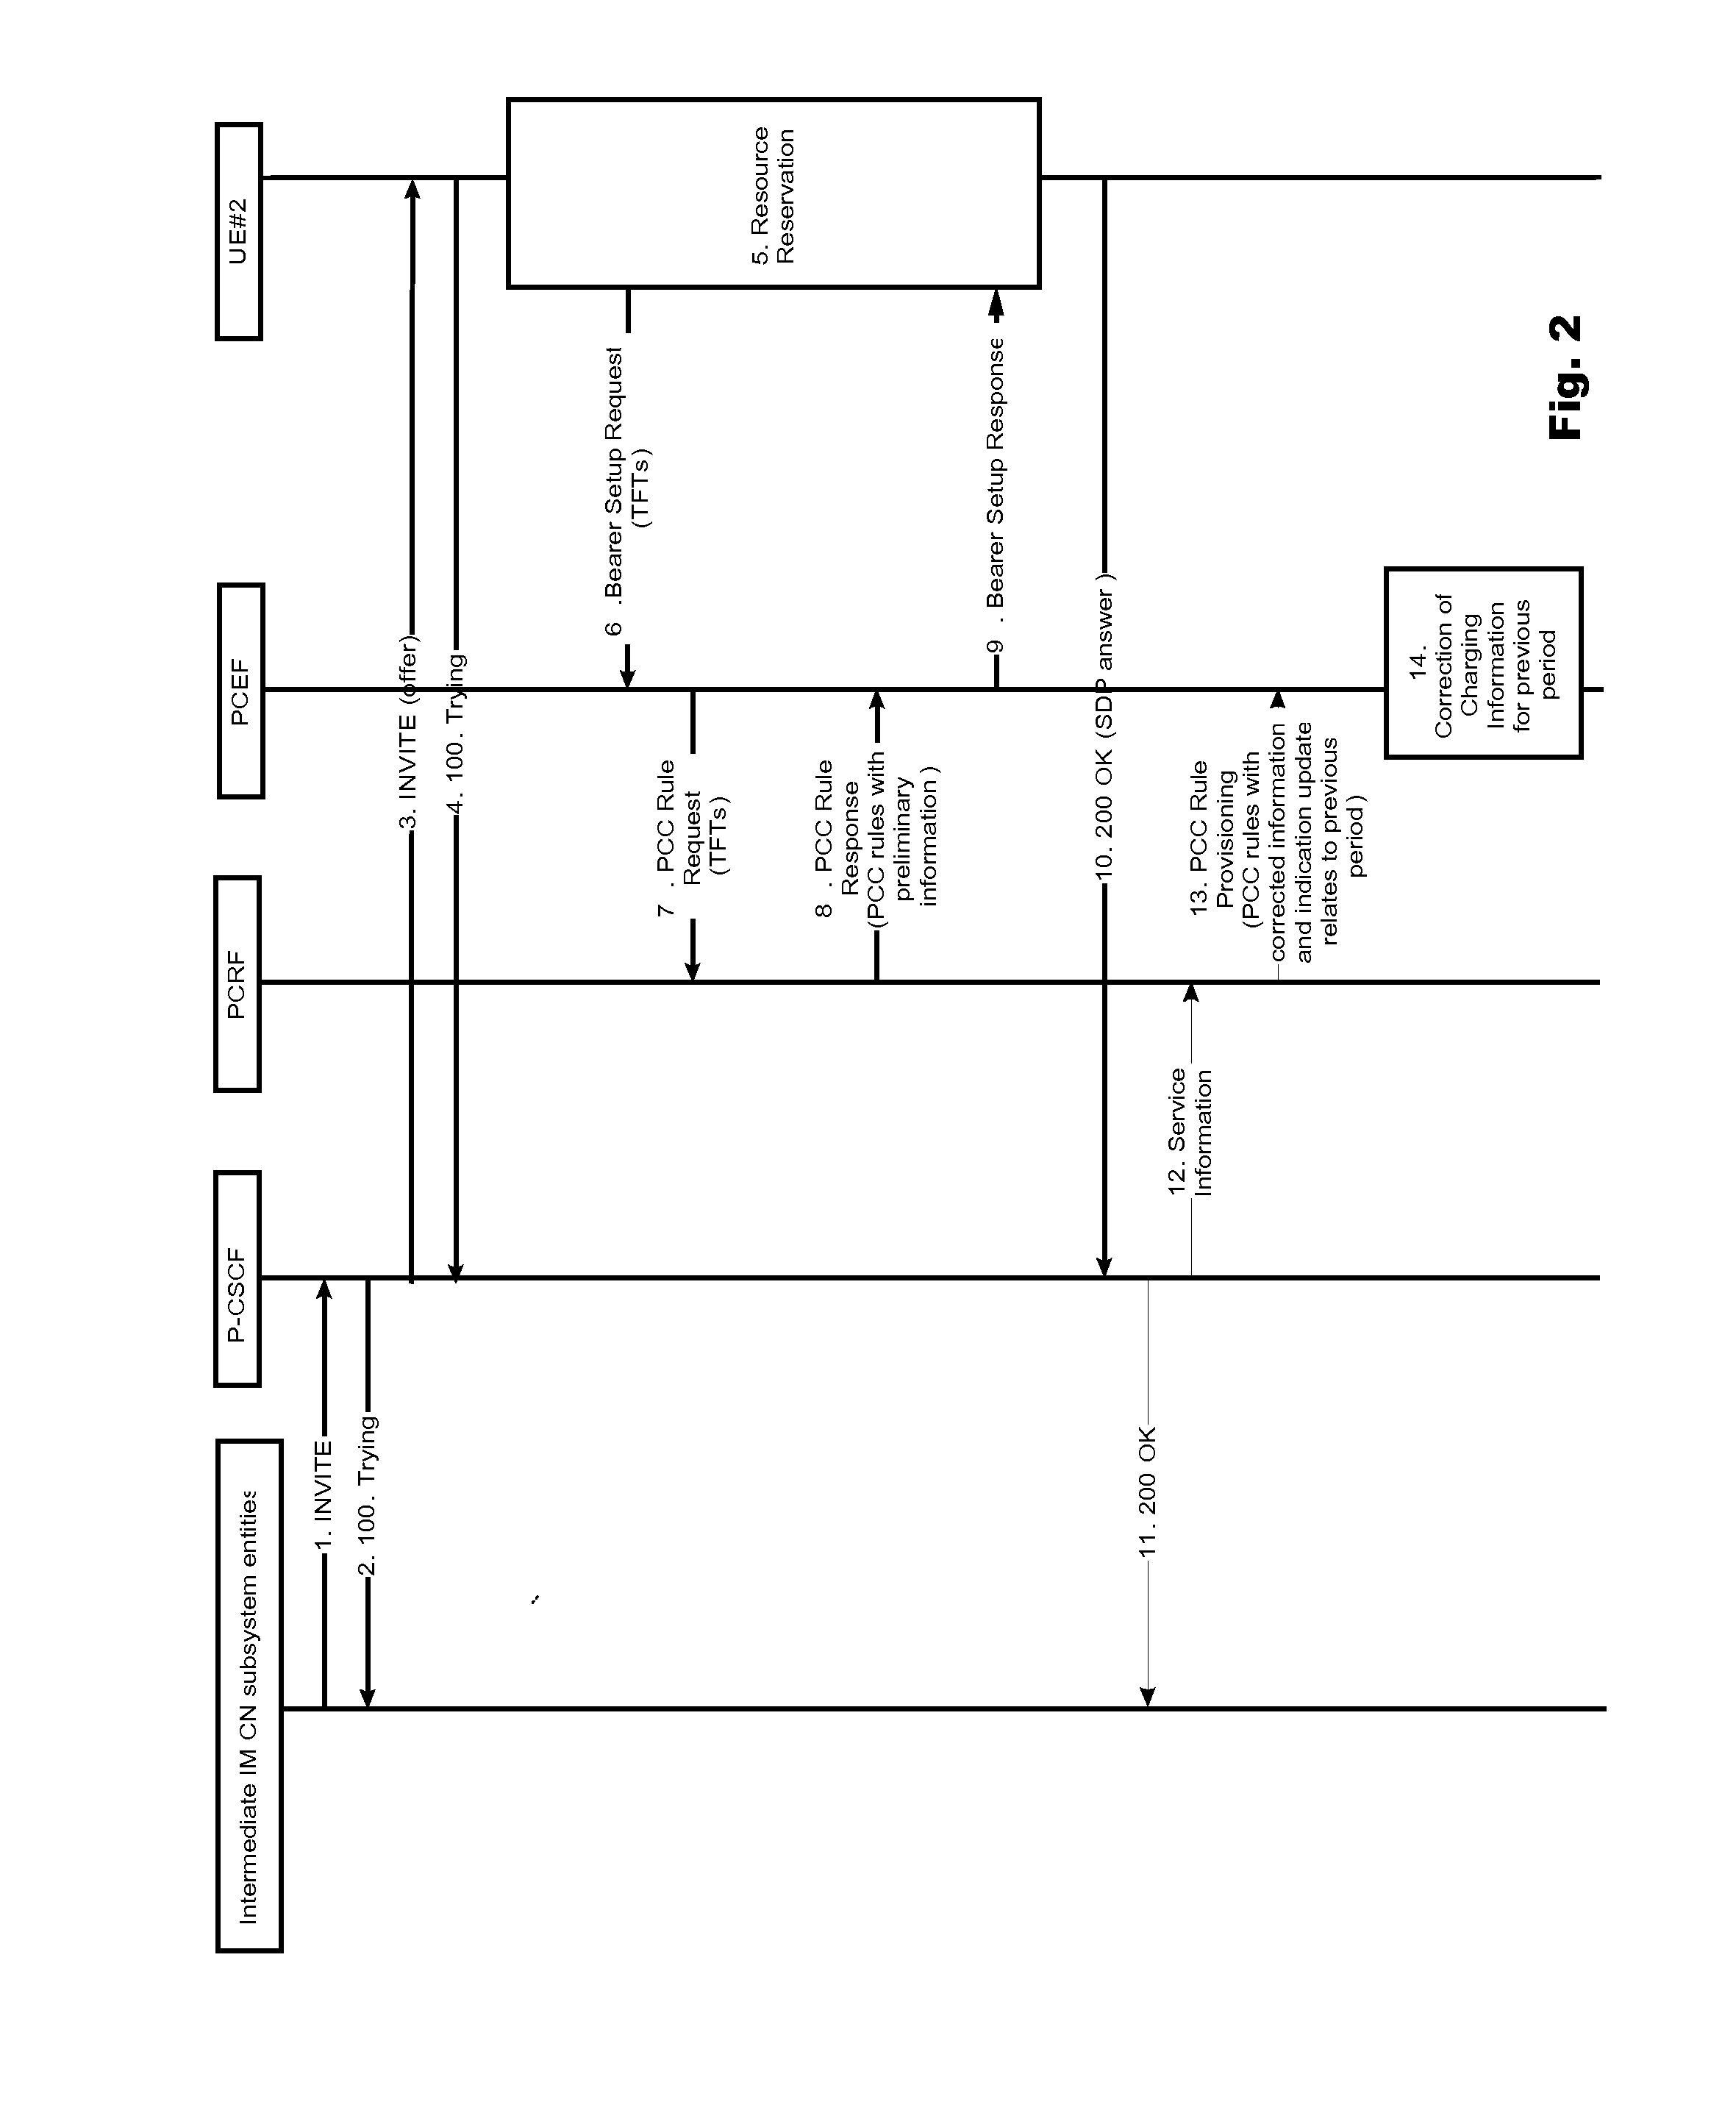 Charging Control Providing Correction of Charging Control Information